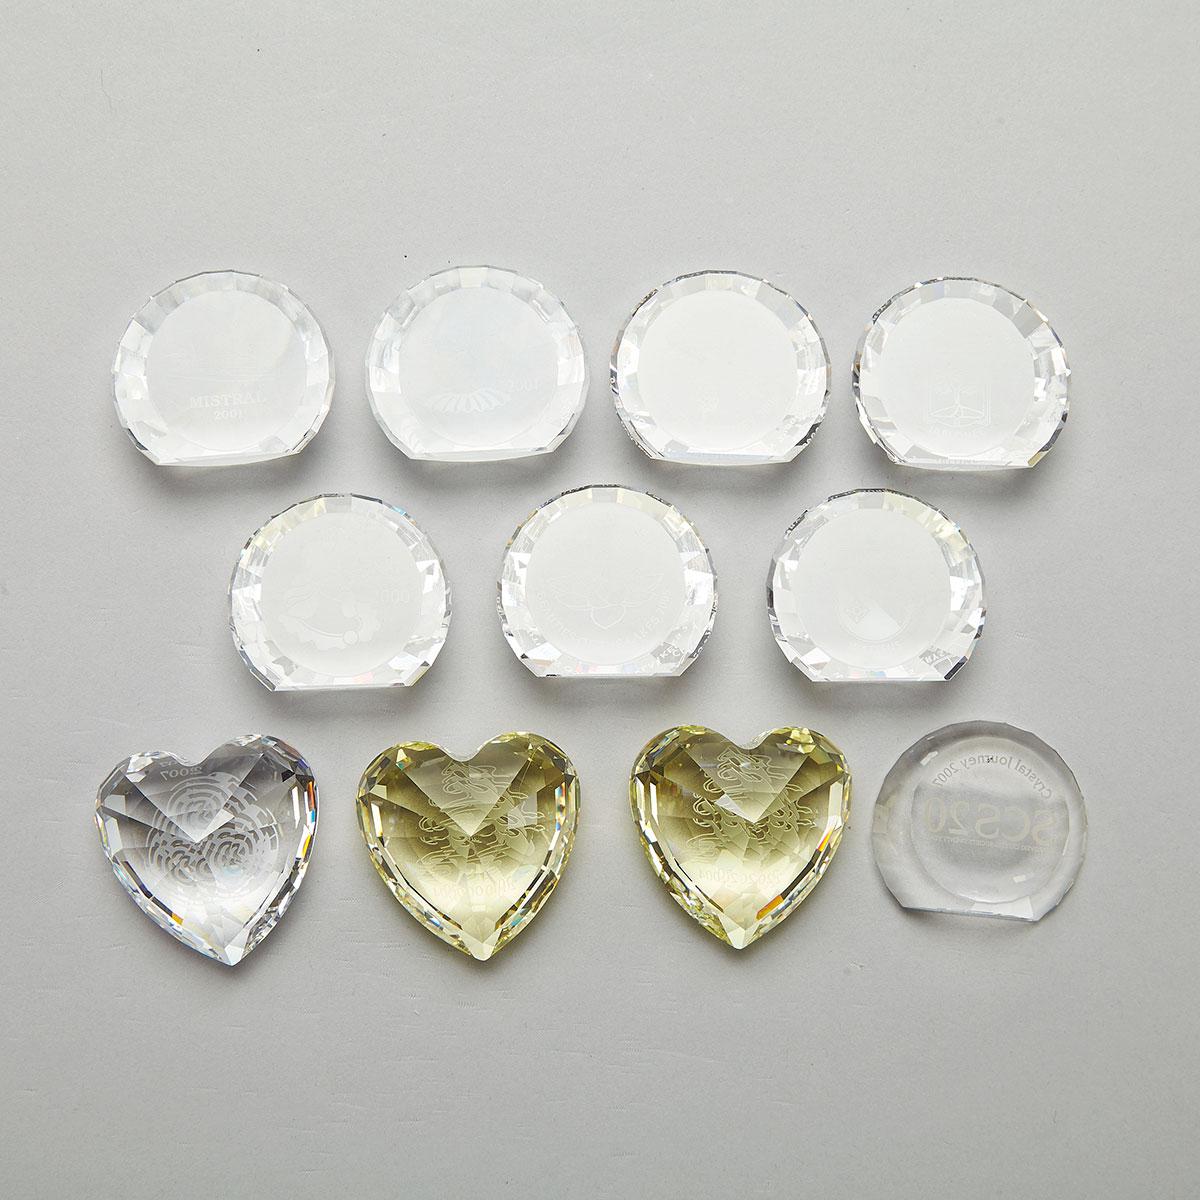 Ten Swarovski Crystal Paperweights, late 20th/early 21st century